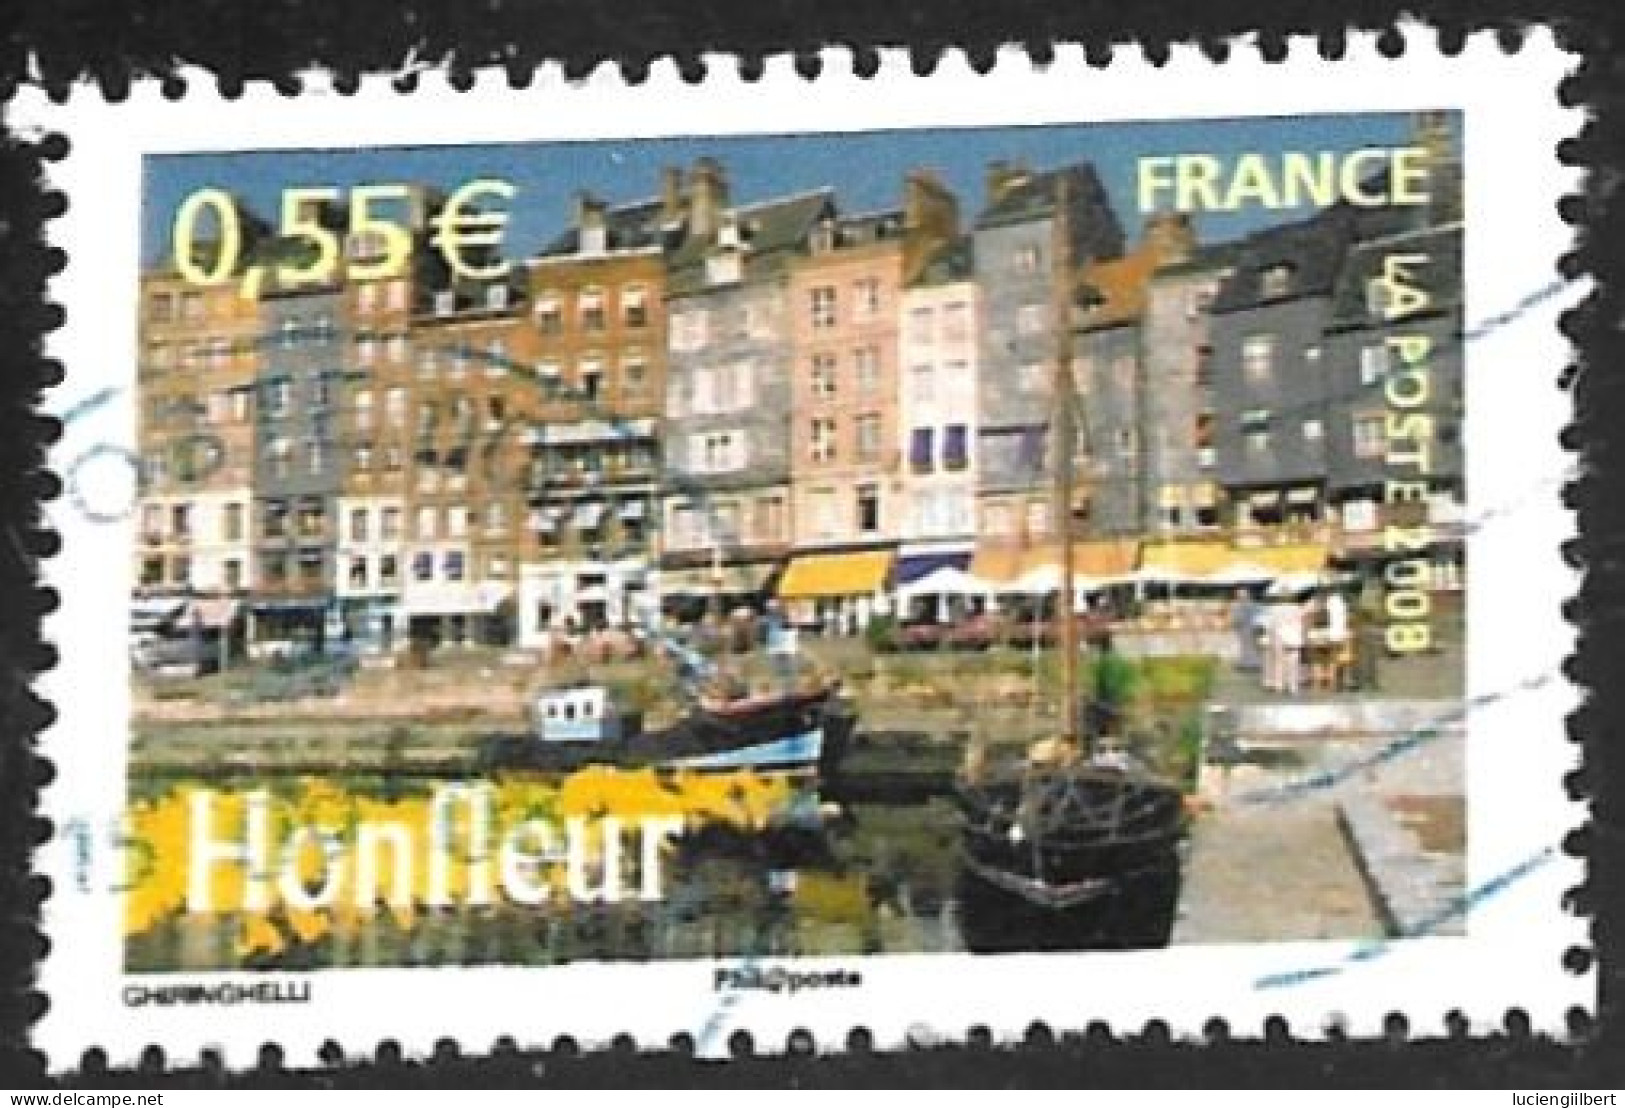 TIMBRE N° 4165   -  HONFLEUR  -  OBLITERE  -  2008 - Used Stamps